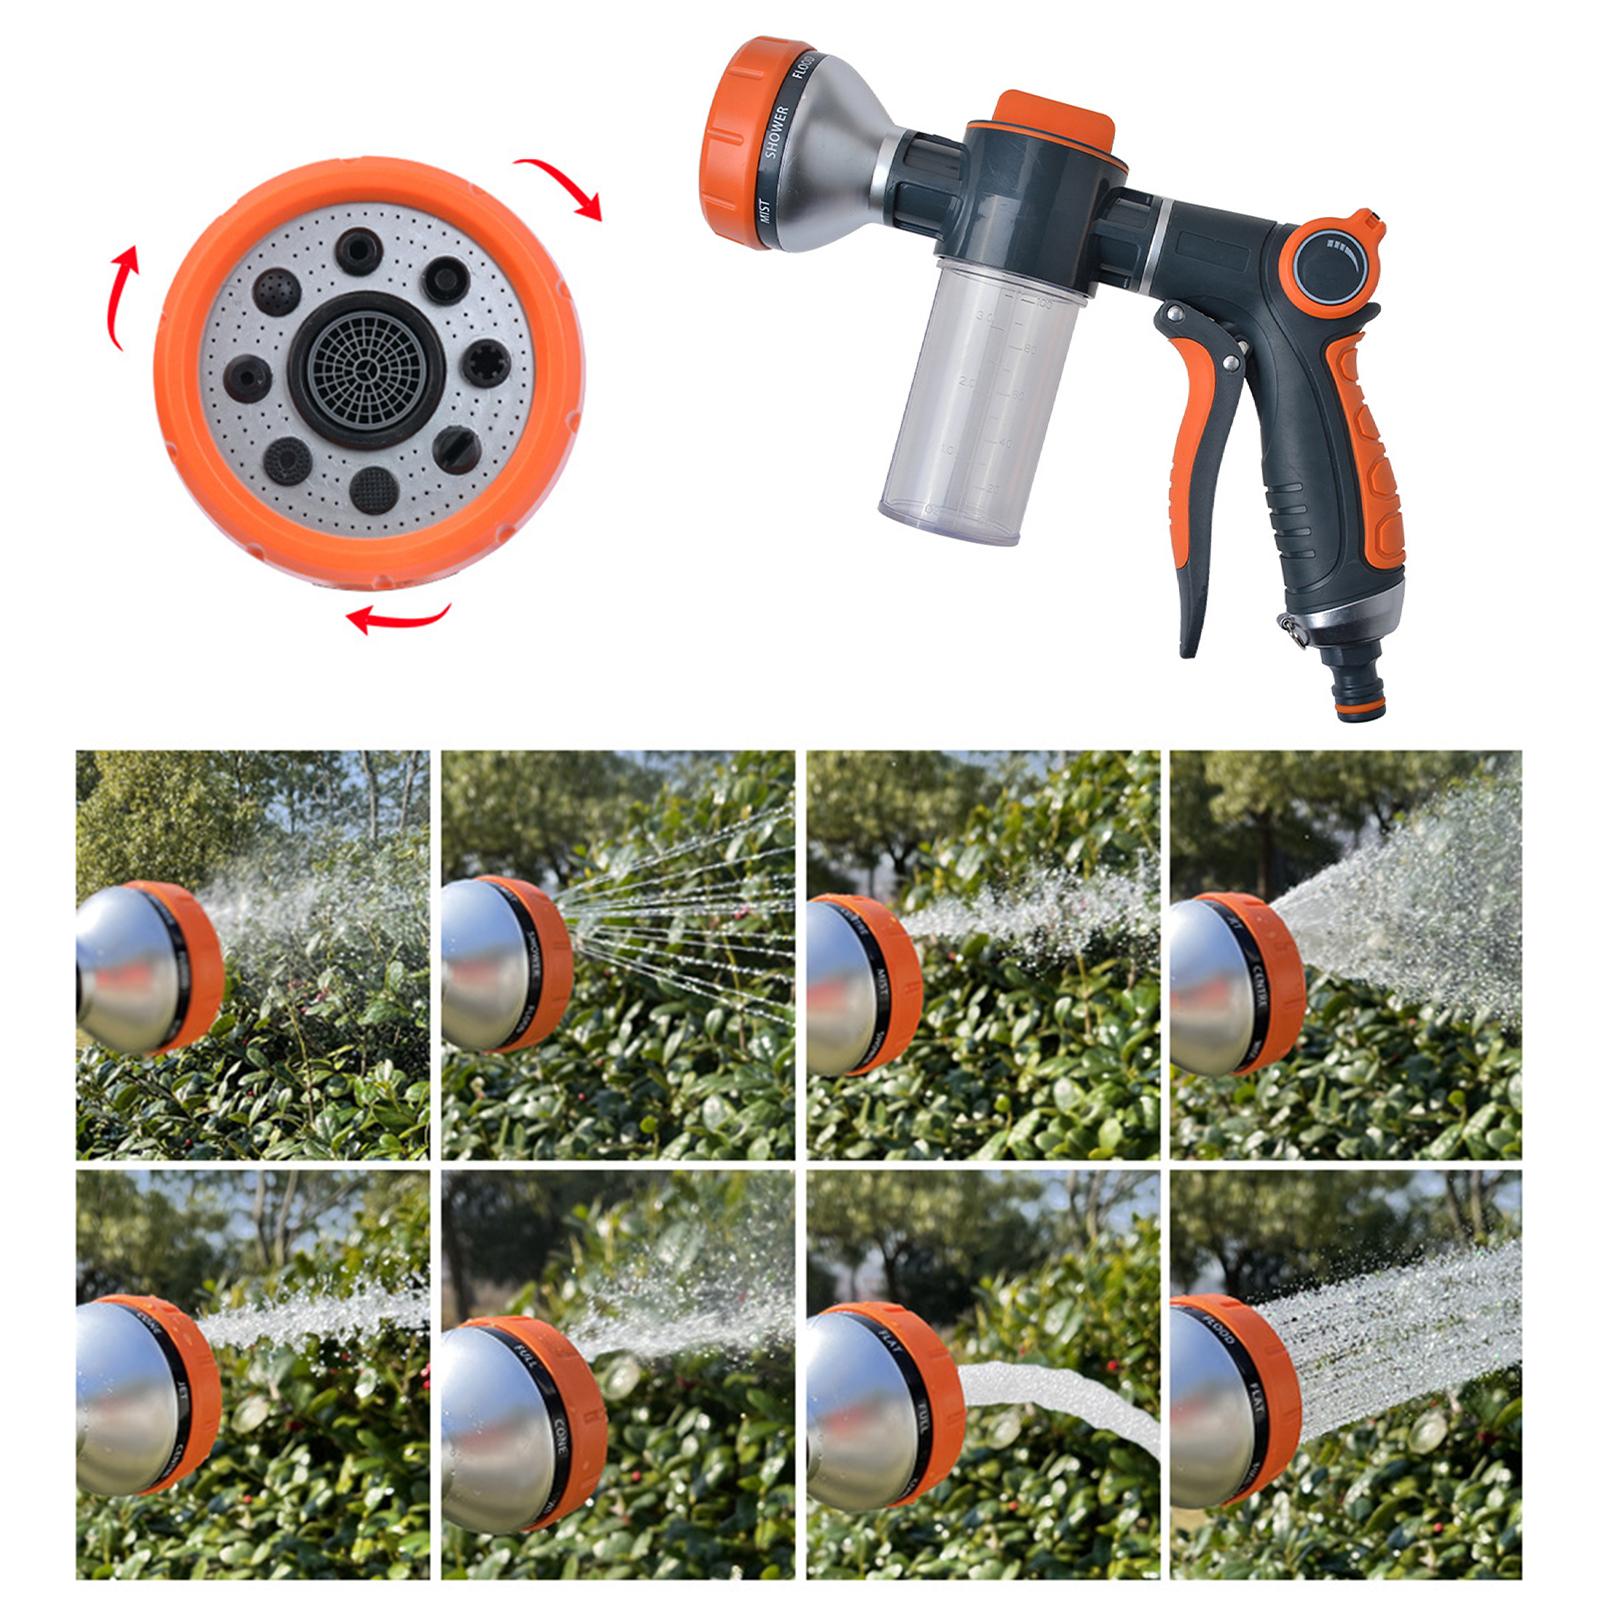 Garden Hose Nozzle Car Wash Nozzle for Showering Pet Cleaning Gardening